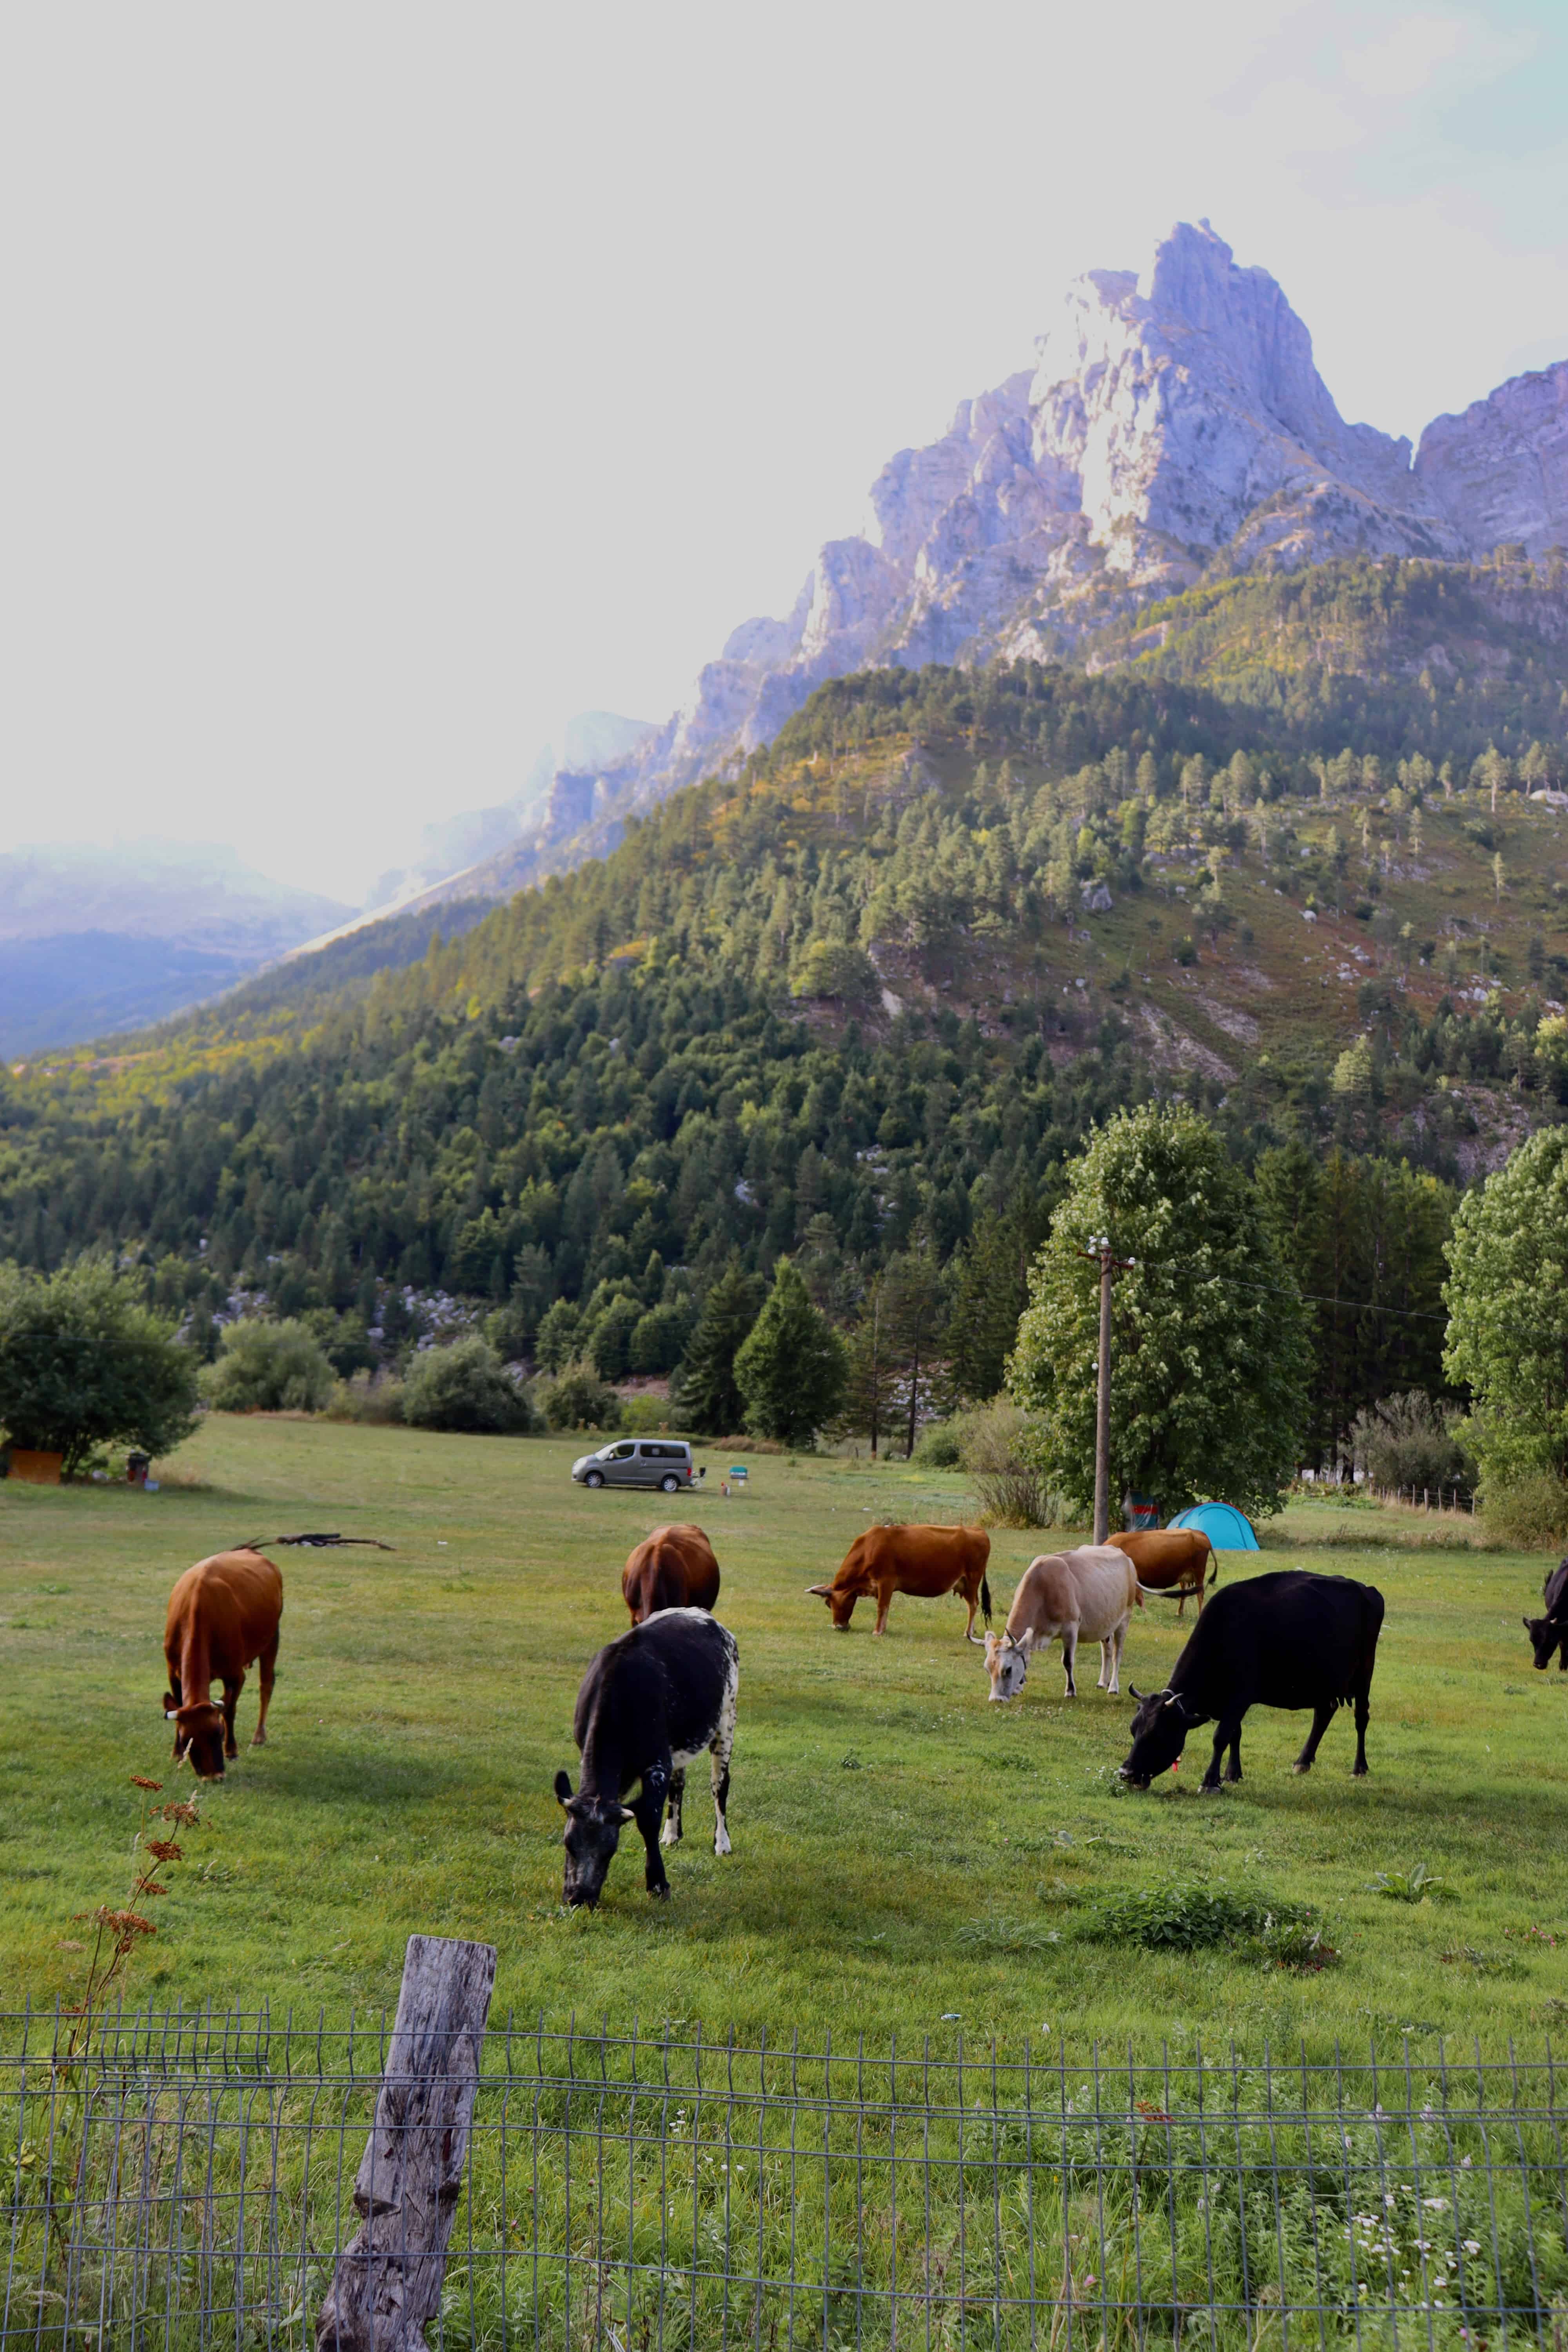 Staying in Valbona Valley National Park